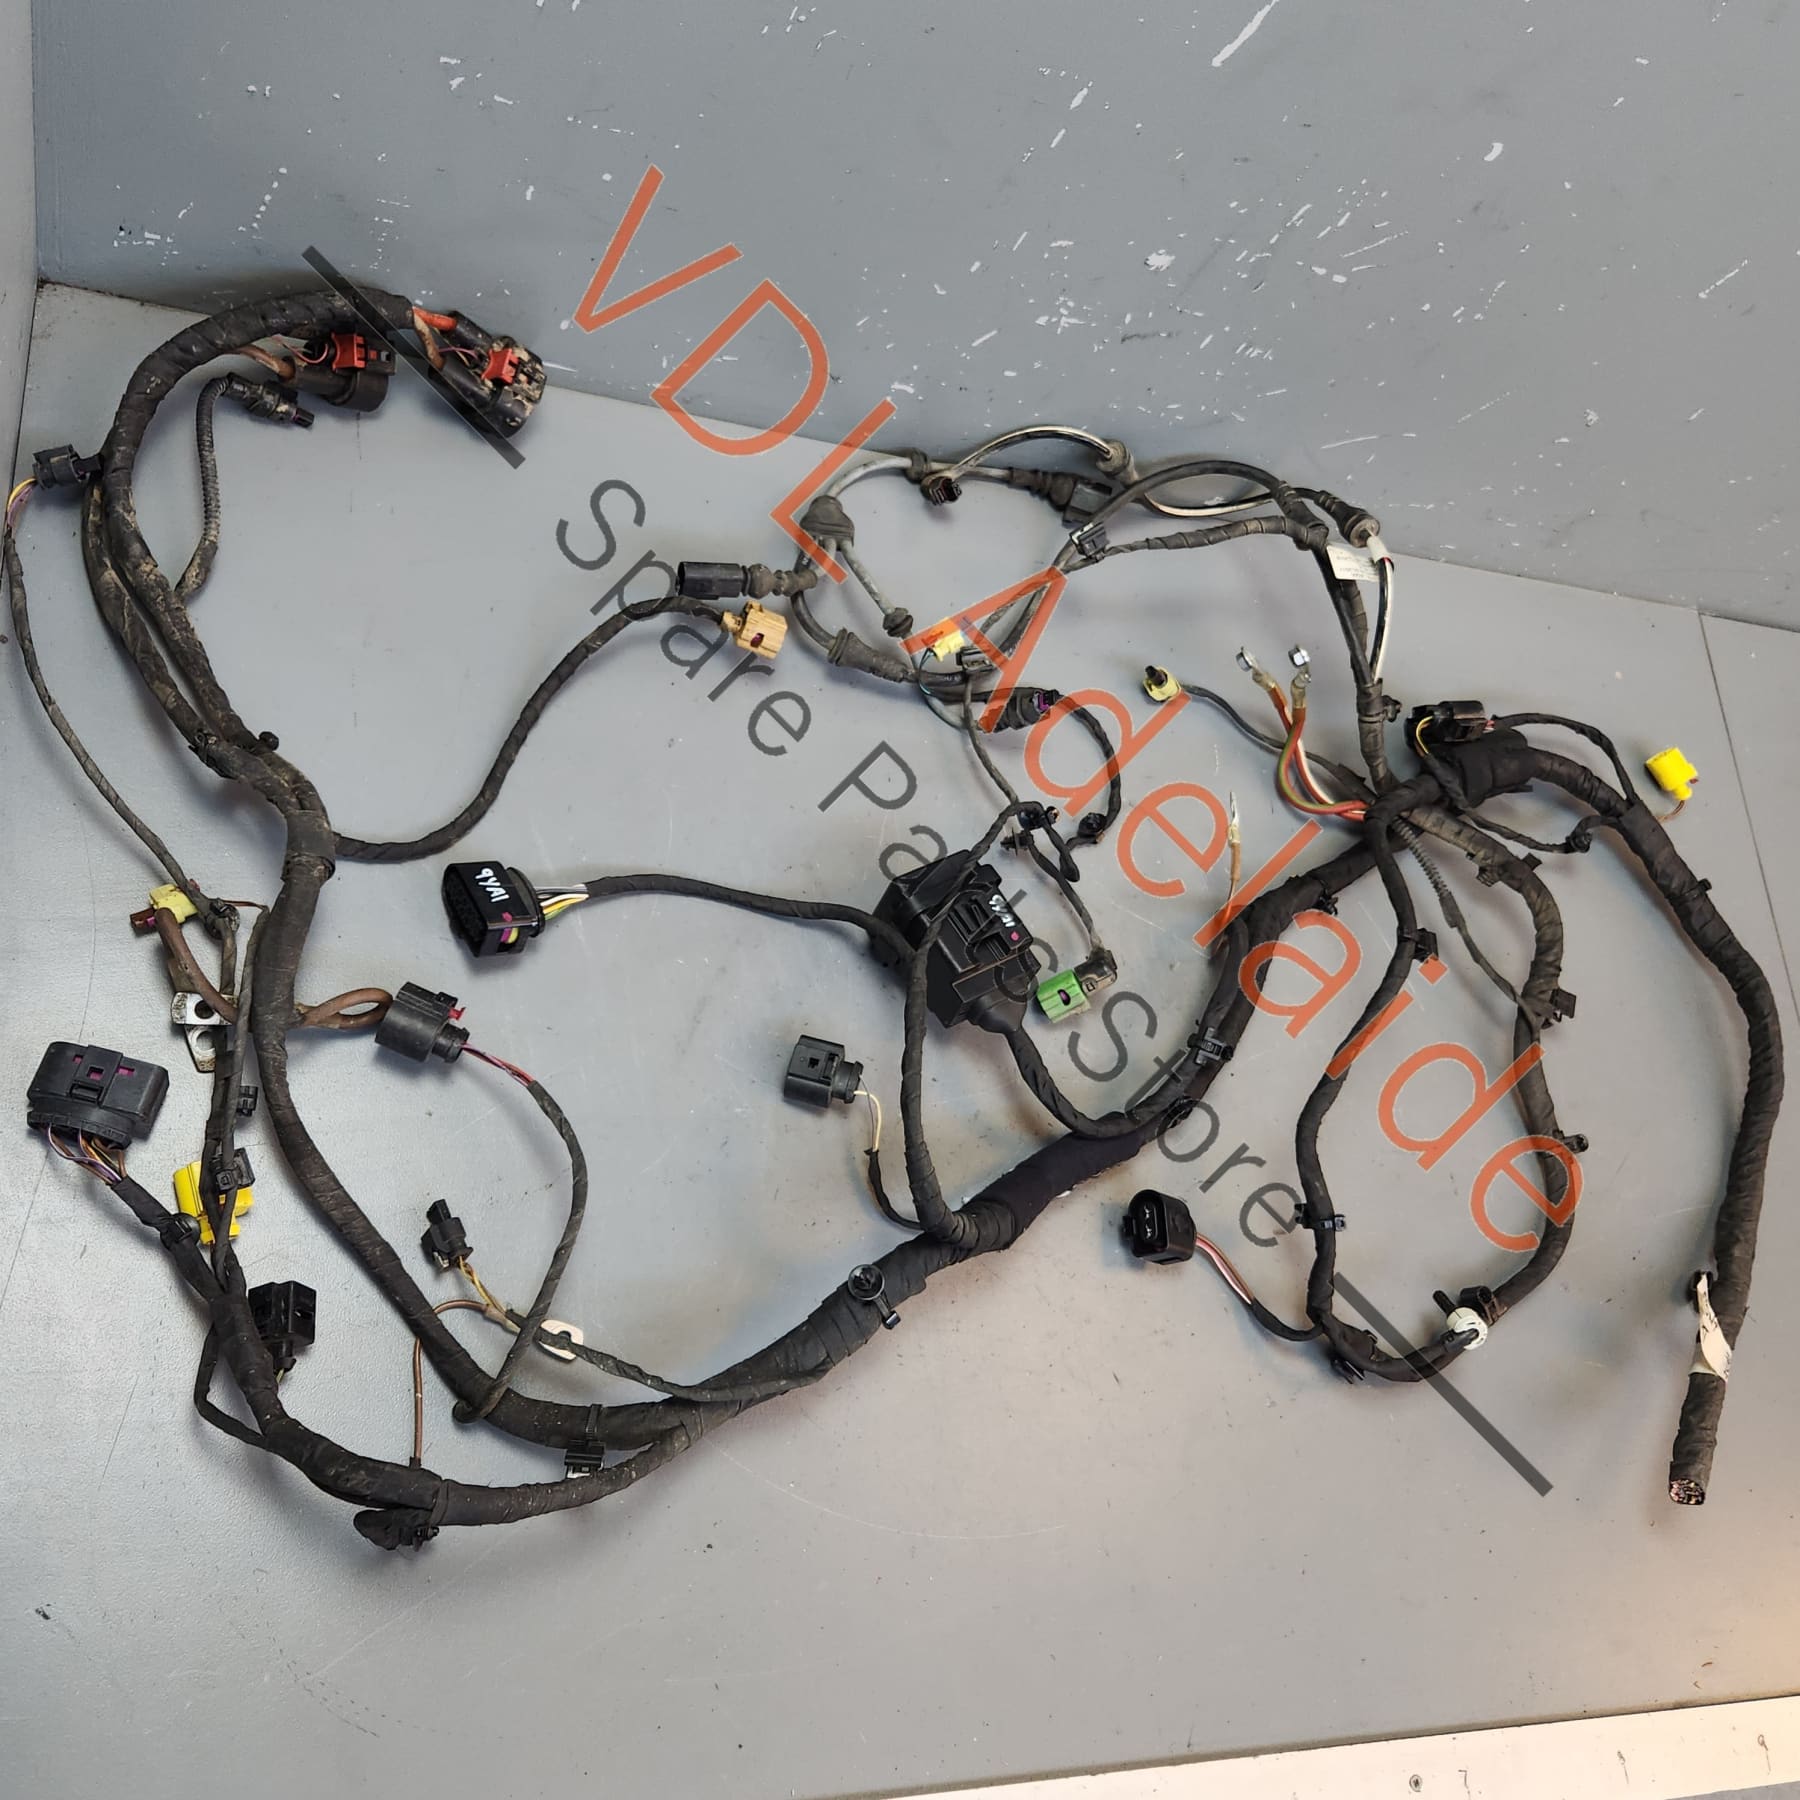 9Y0971071 9Y0971284   Porsche Cayenne E3 Front Right Engine Bay Wiring Harness Loom Cable Part Section 9Y0971071 & 9Y0971284